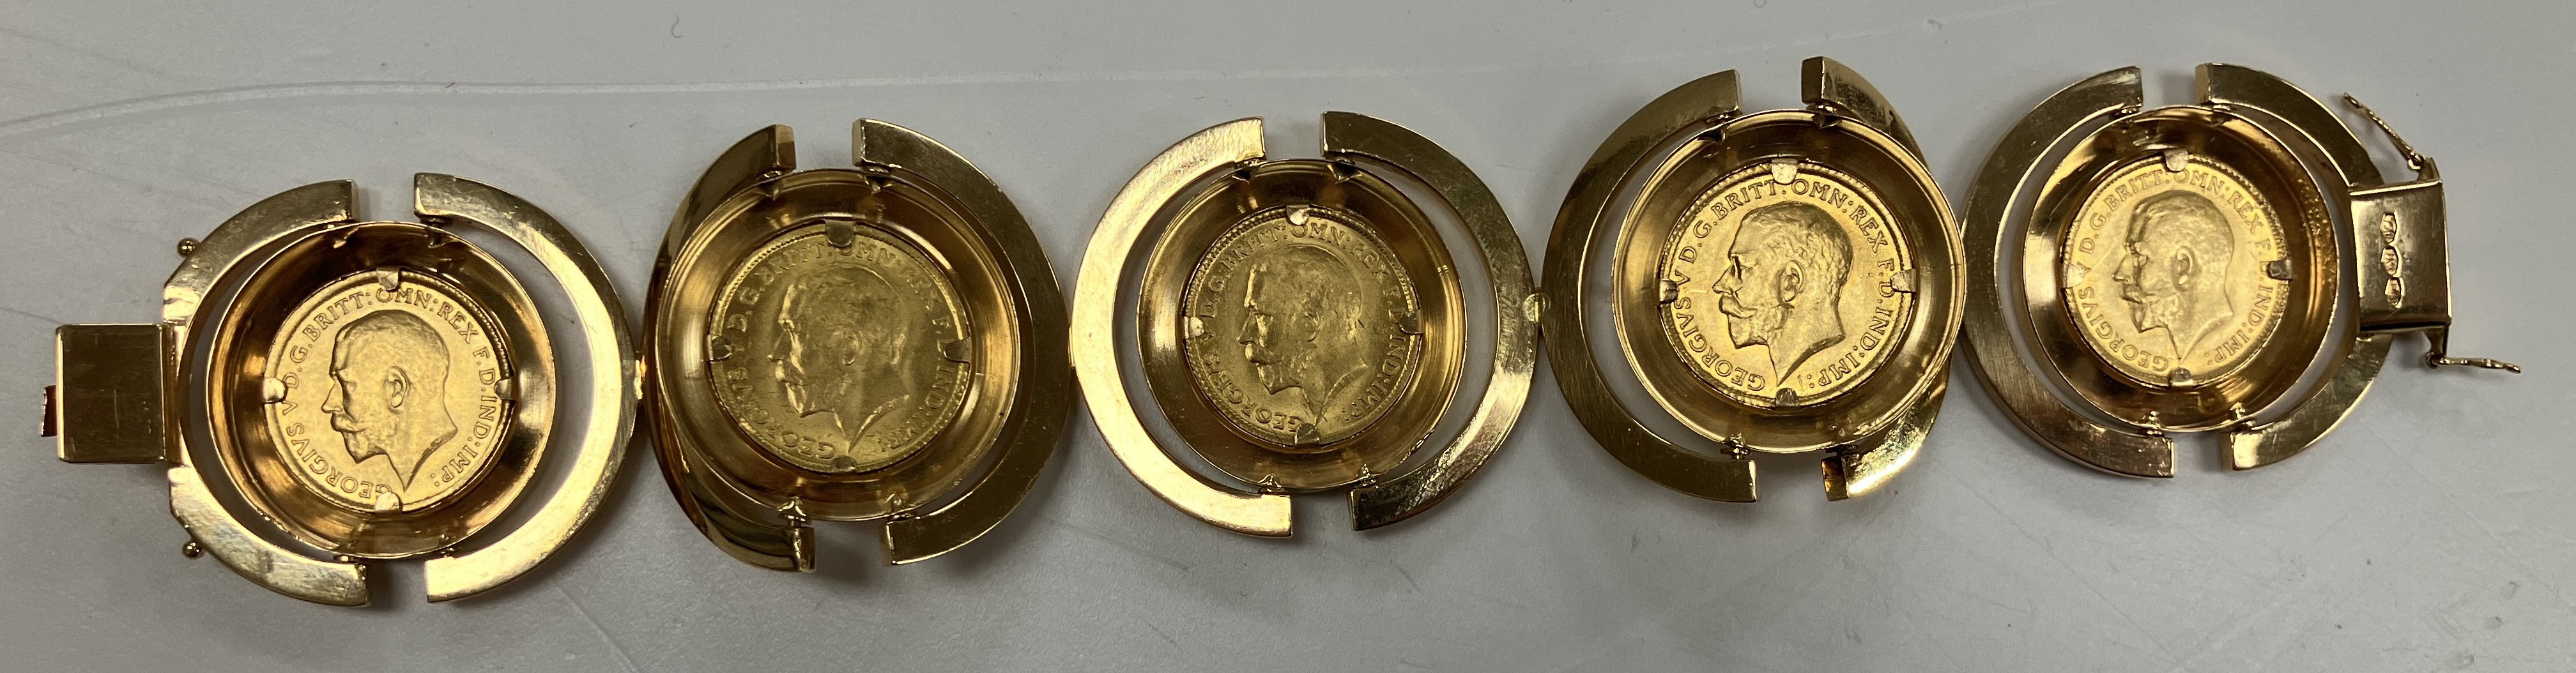 An 18 carat gold bracelet with Arezzo hallmarks, set with five George V gold half sovereigns, 1913, - Image 2 of 16